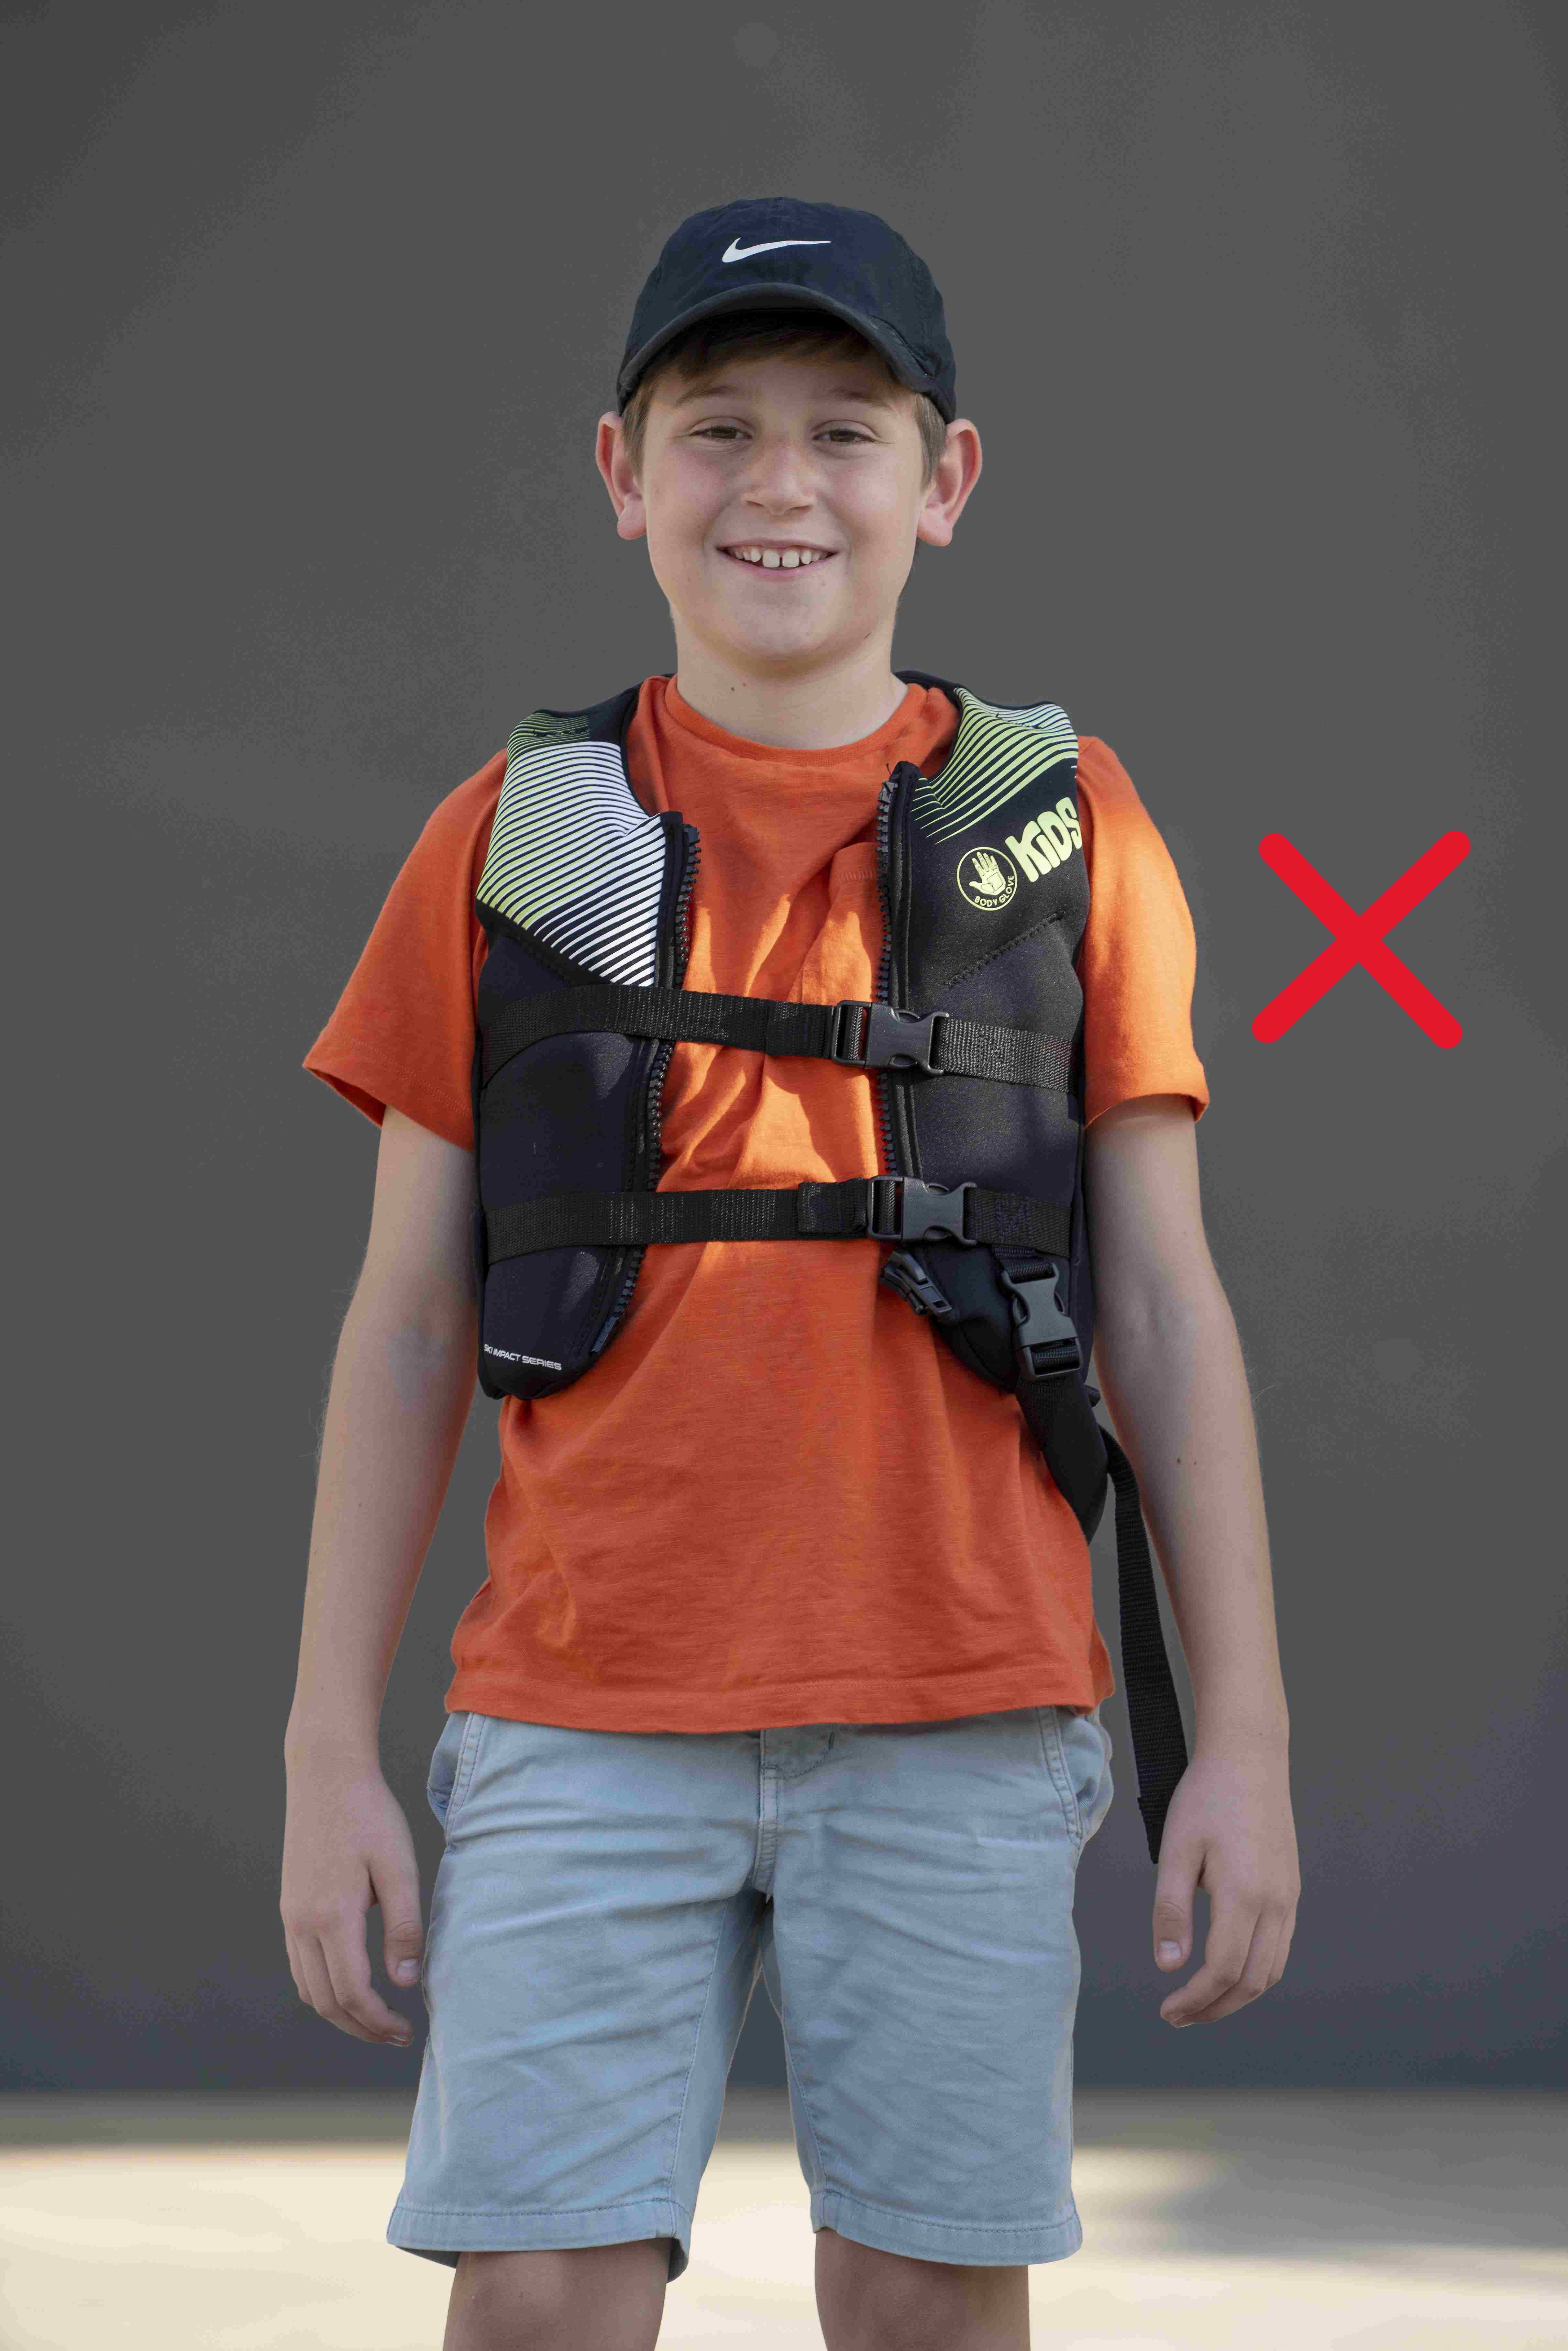 Lifejacket on a child standing up that is too small